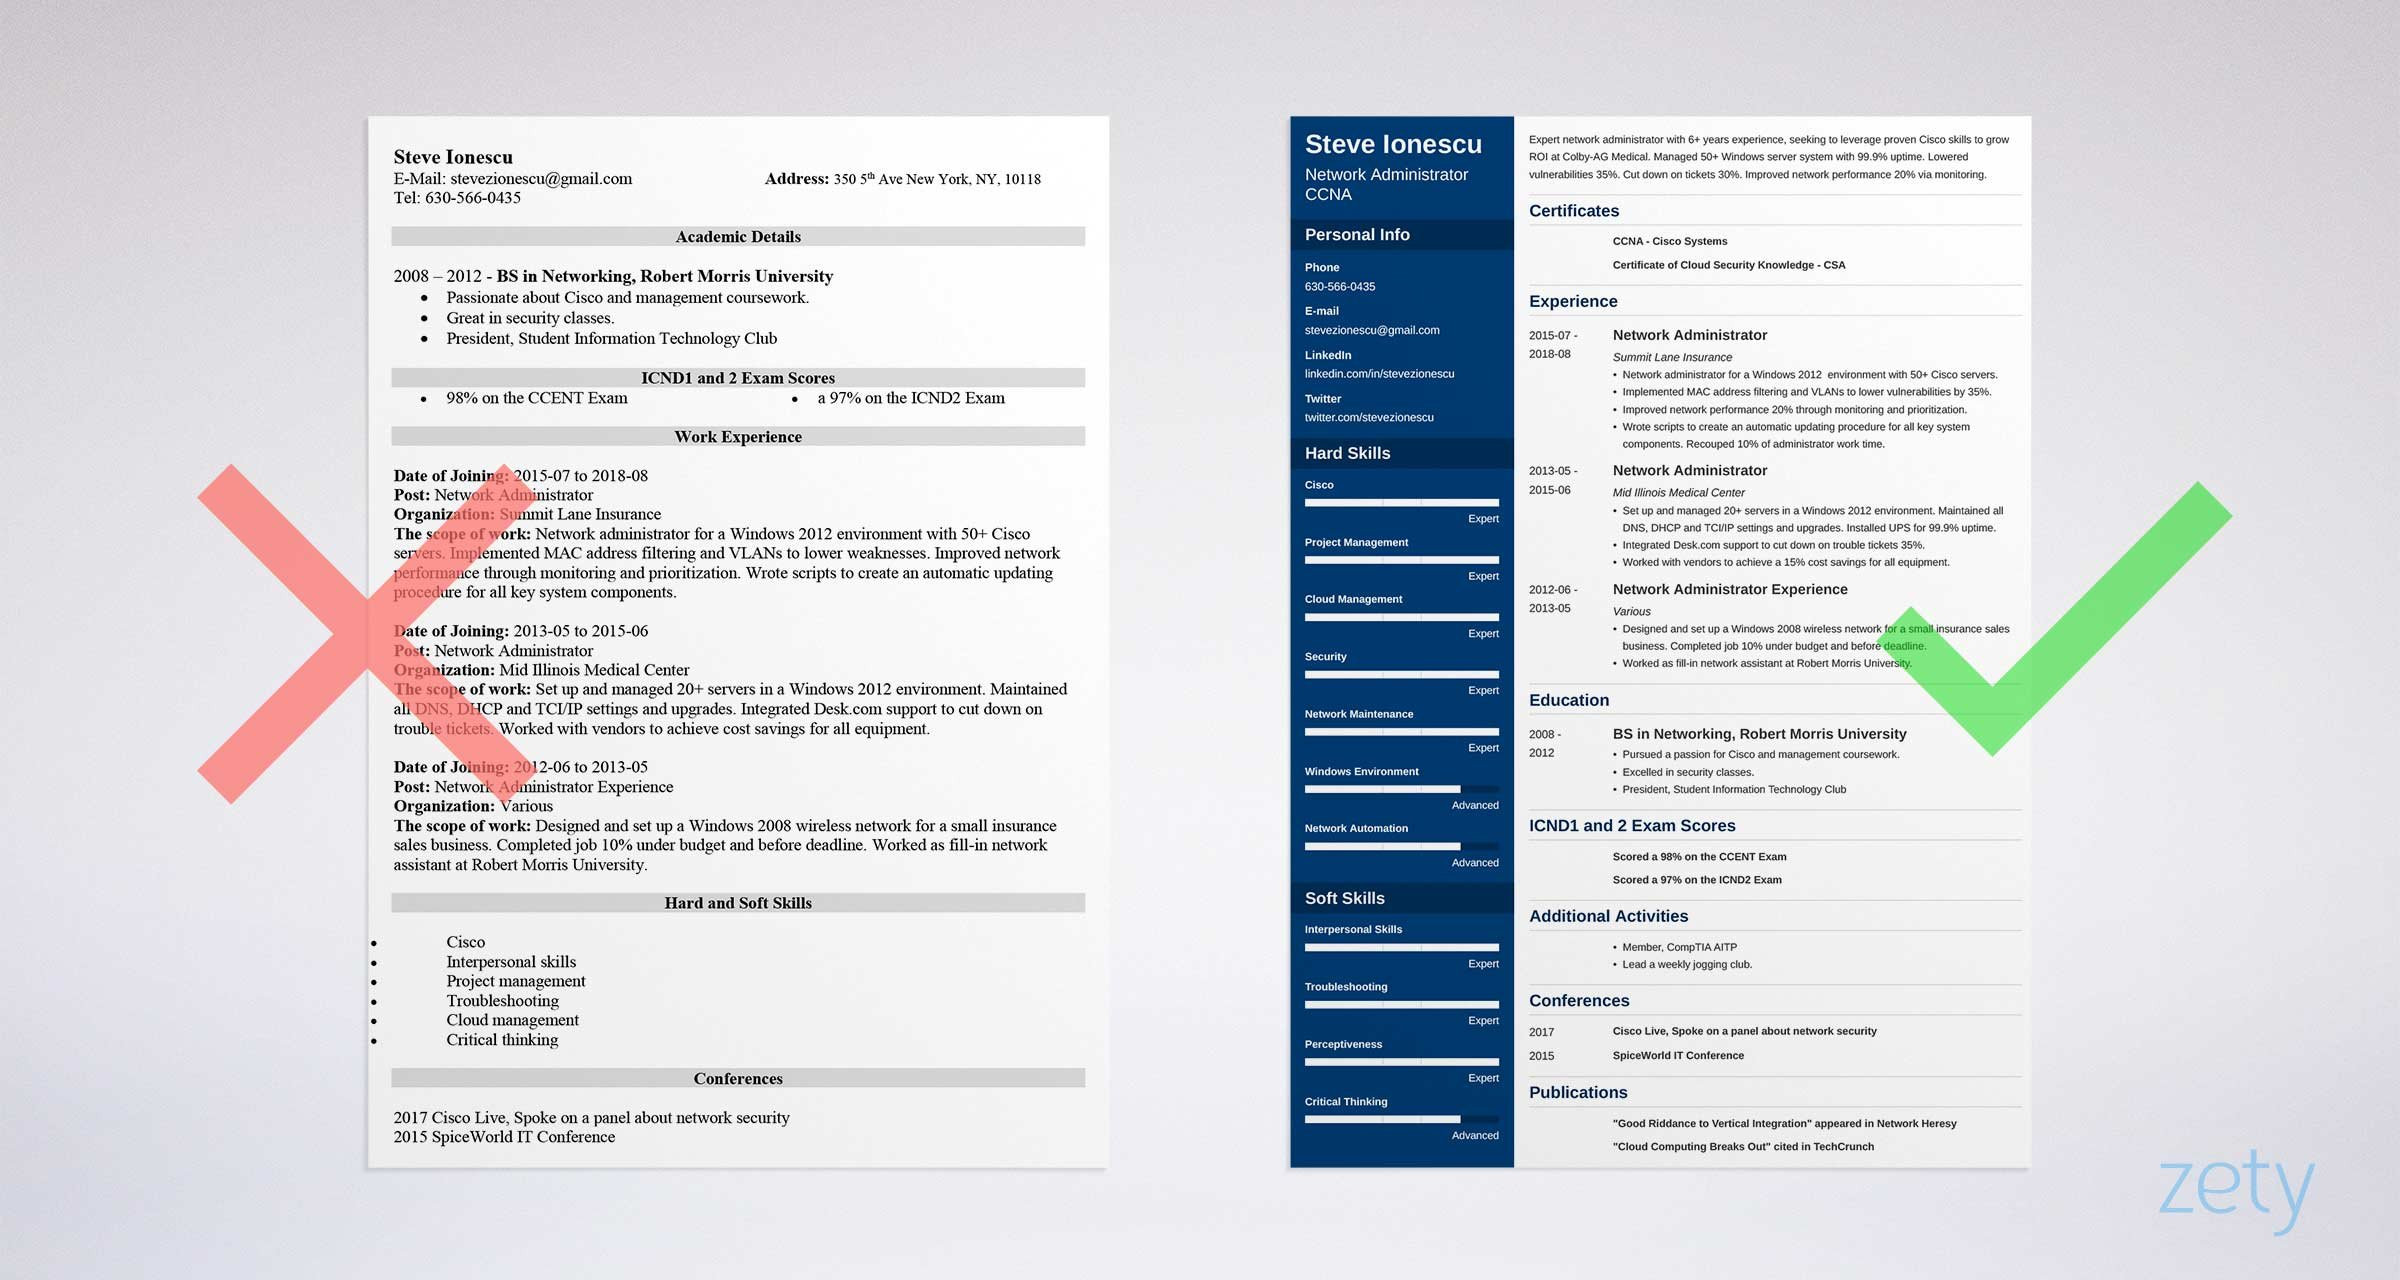 Cisco Network Manager at Hospital Resume Samples Network Administrator Resume Sample (with Skills & Tips)